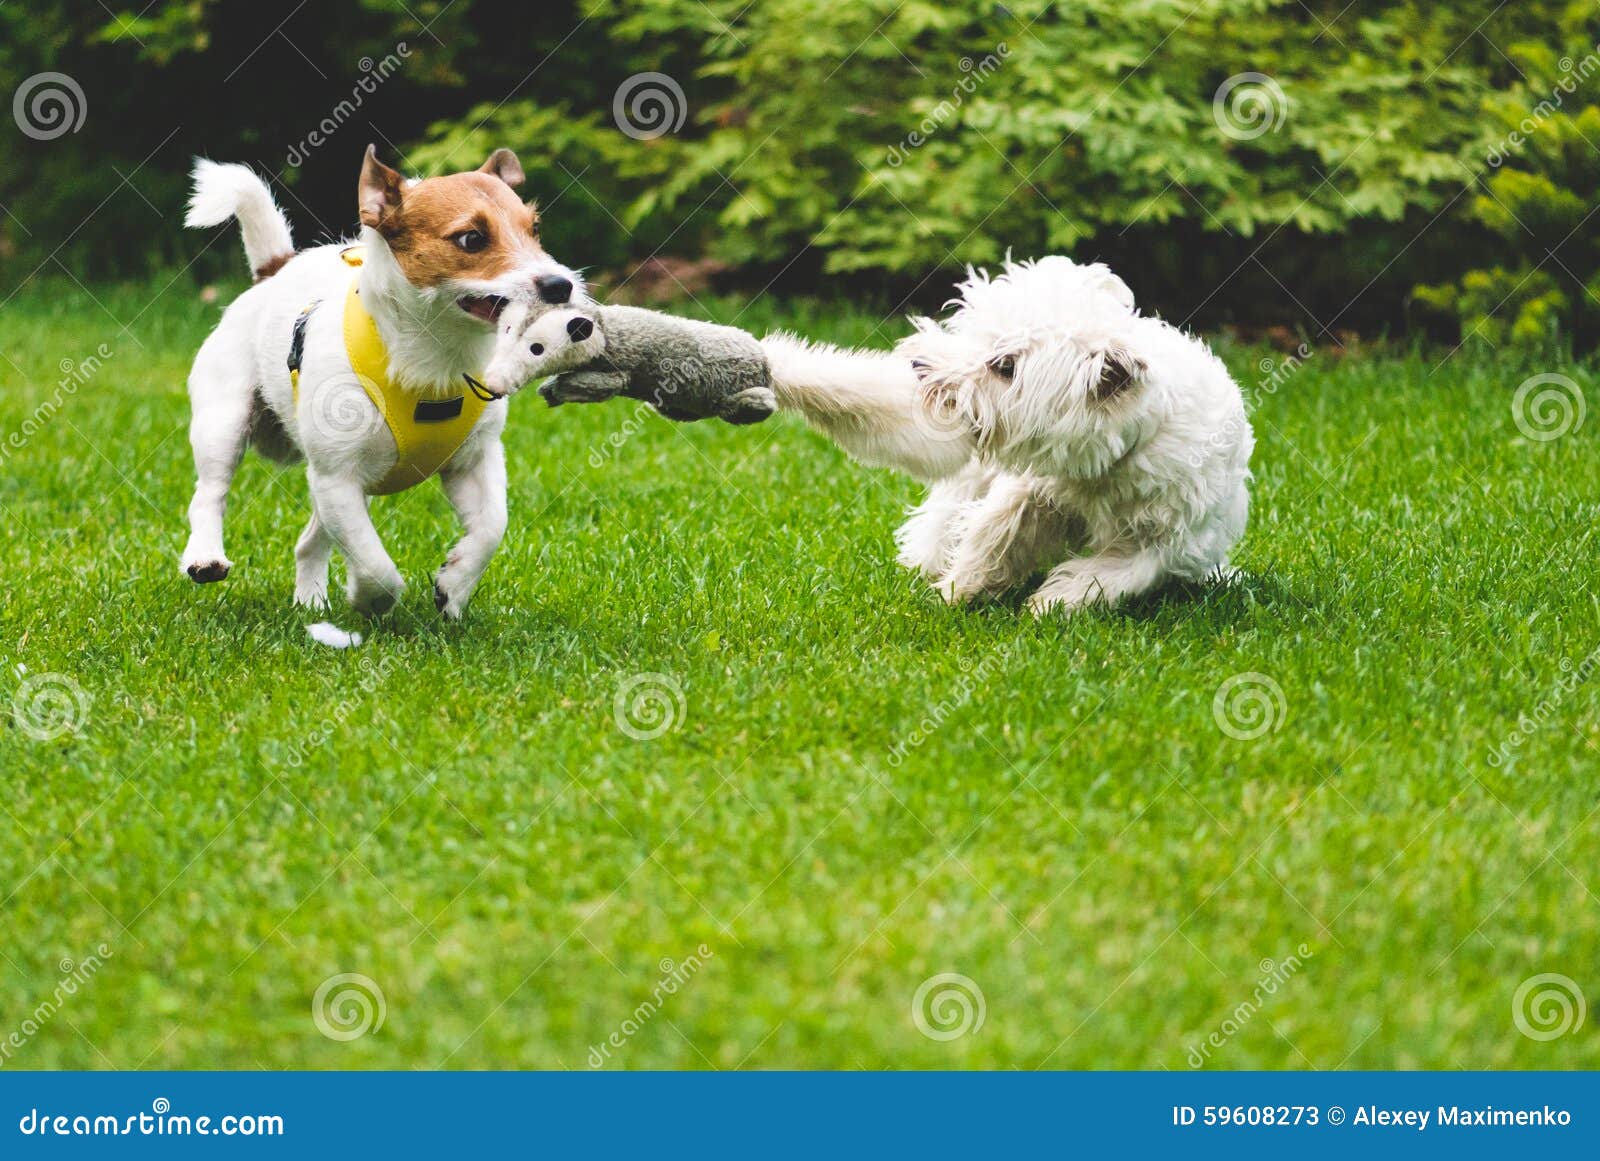 Dogs Playing Tug War With A Toy Stock Image - Image of terrier, canine:  59608273